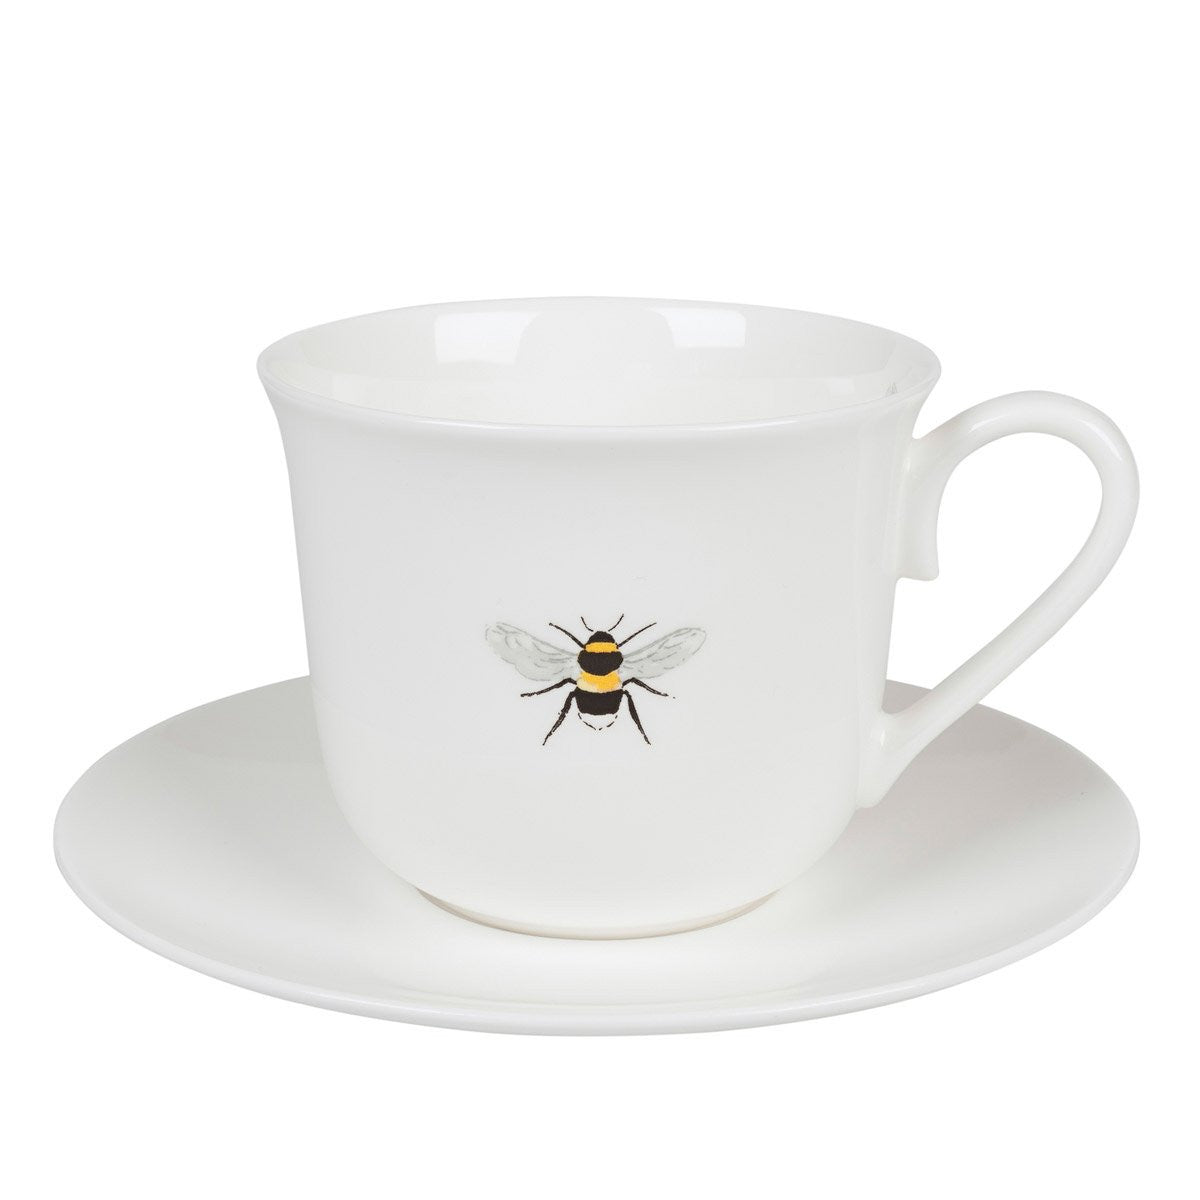 Sophie Allport Bees Tea Cup and Saucer